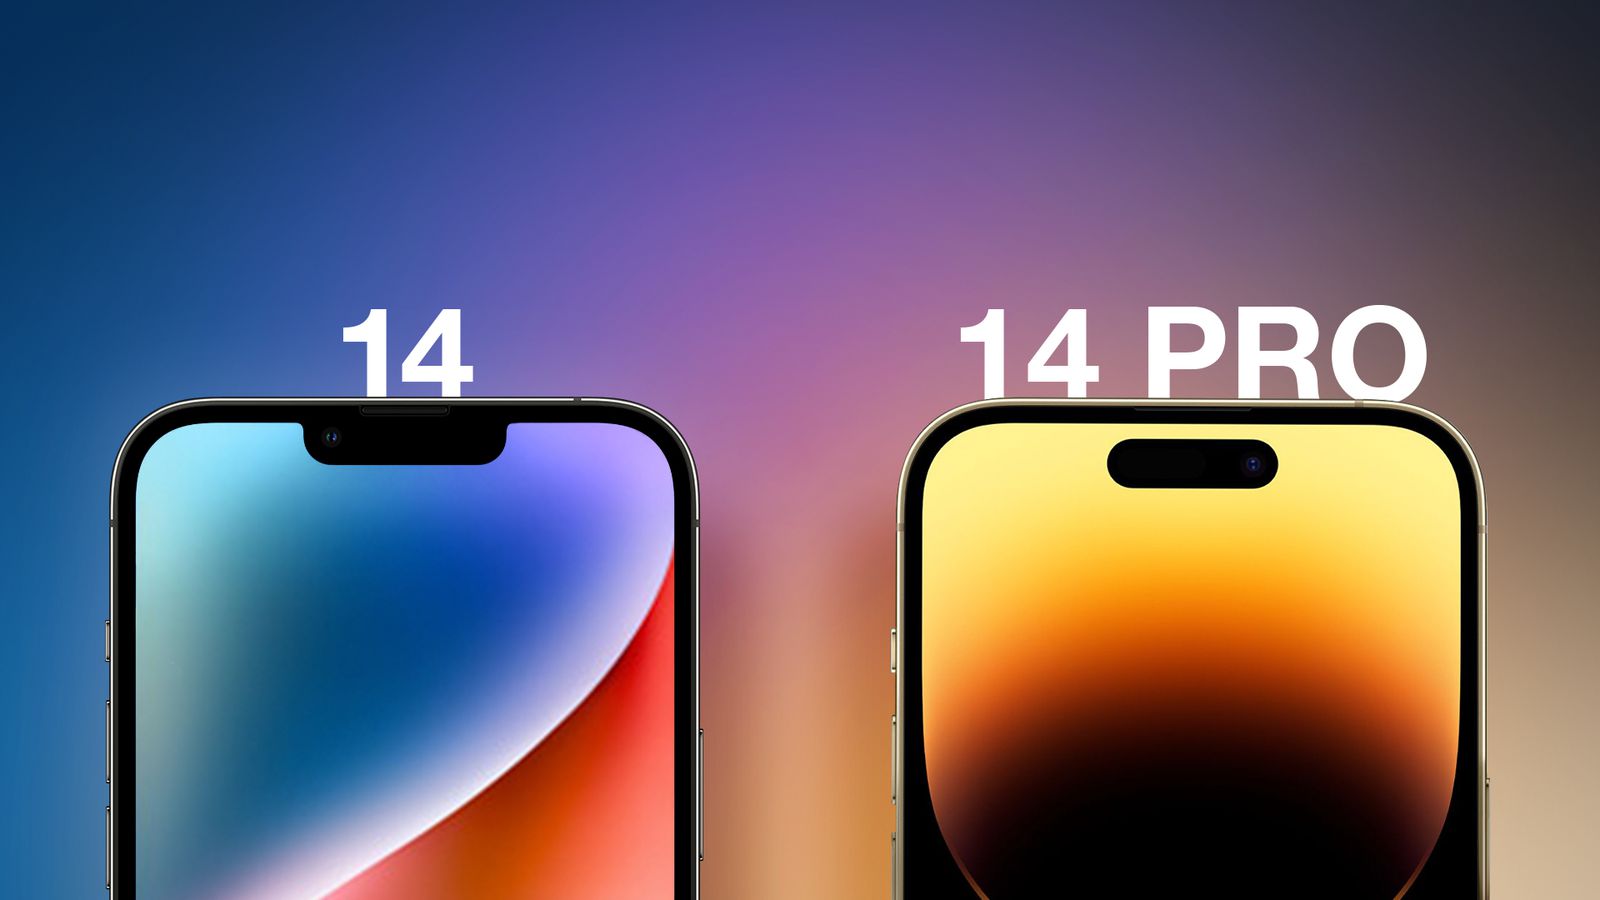 iPhone 14 Pro & iPhone 14 Pro Max – New Features & Specs